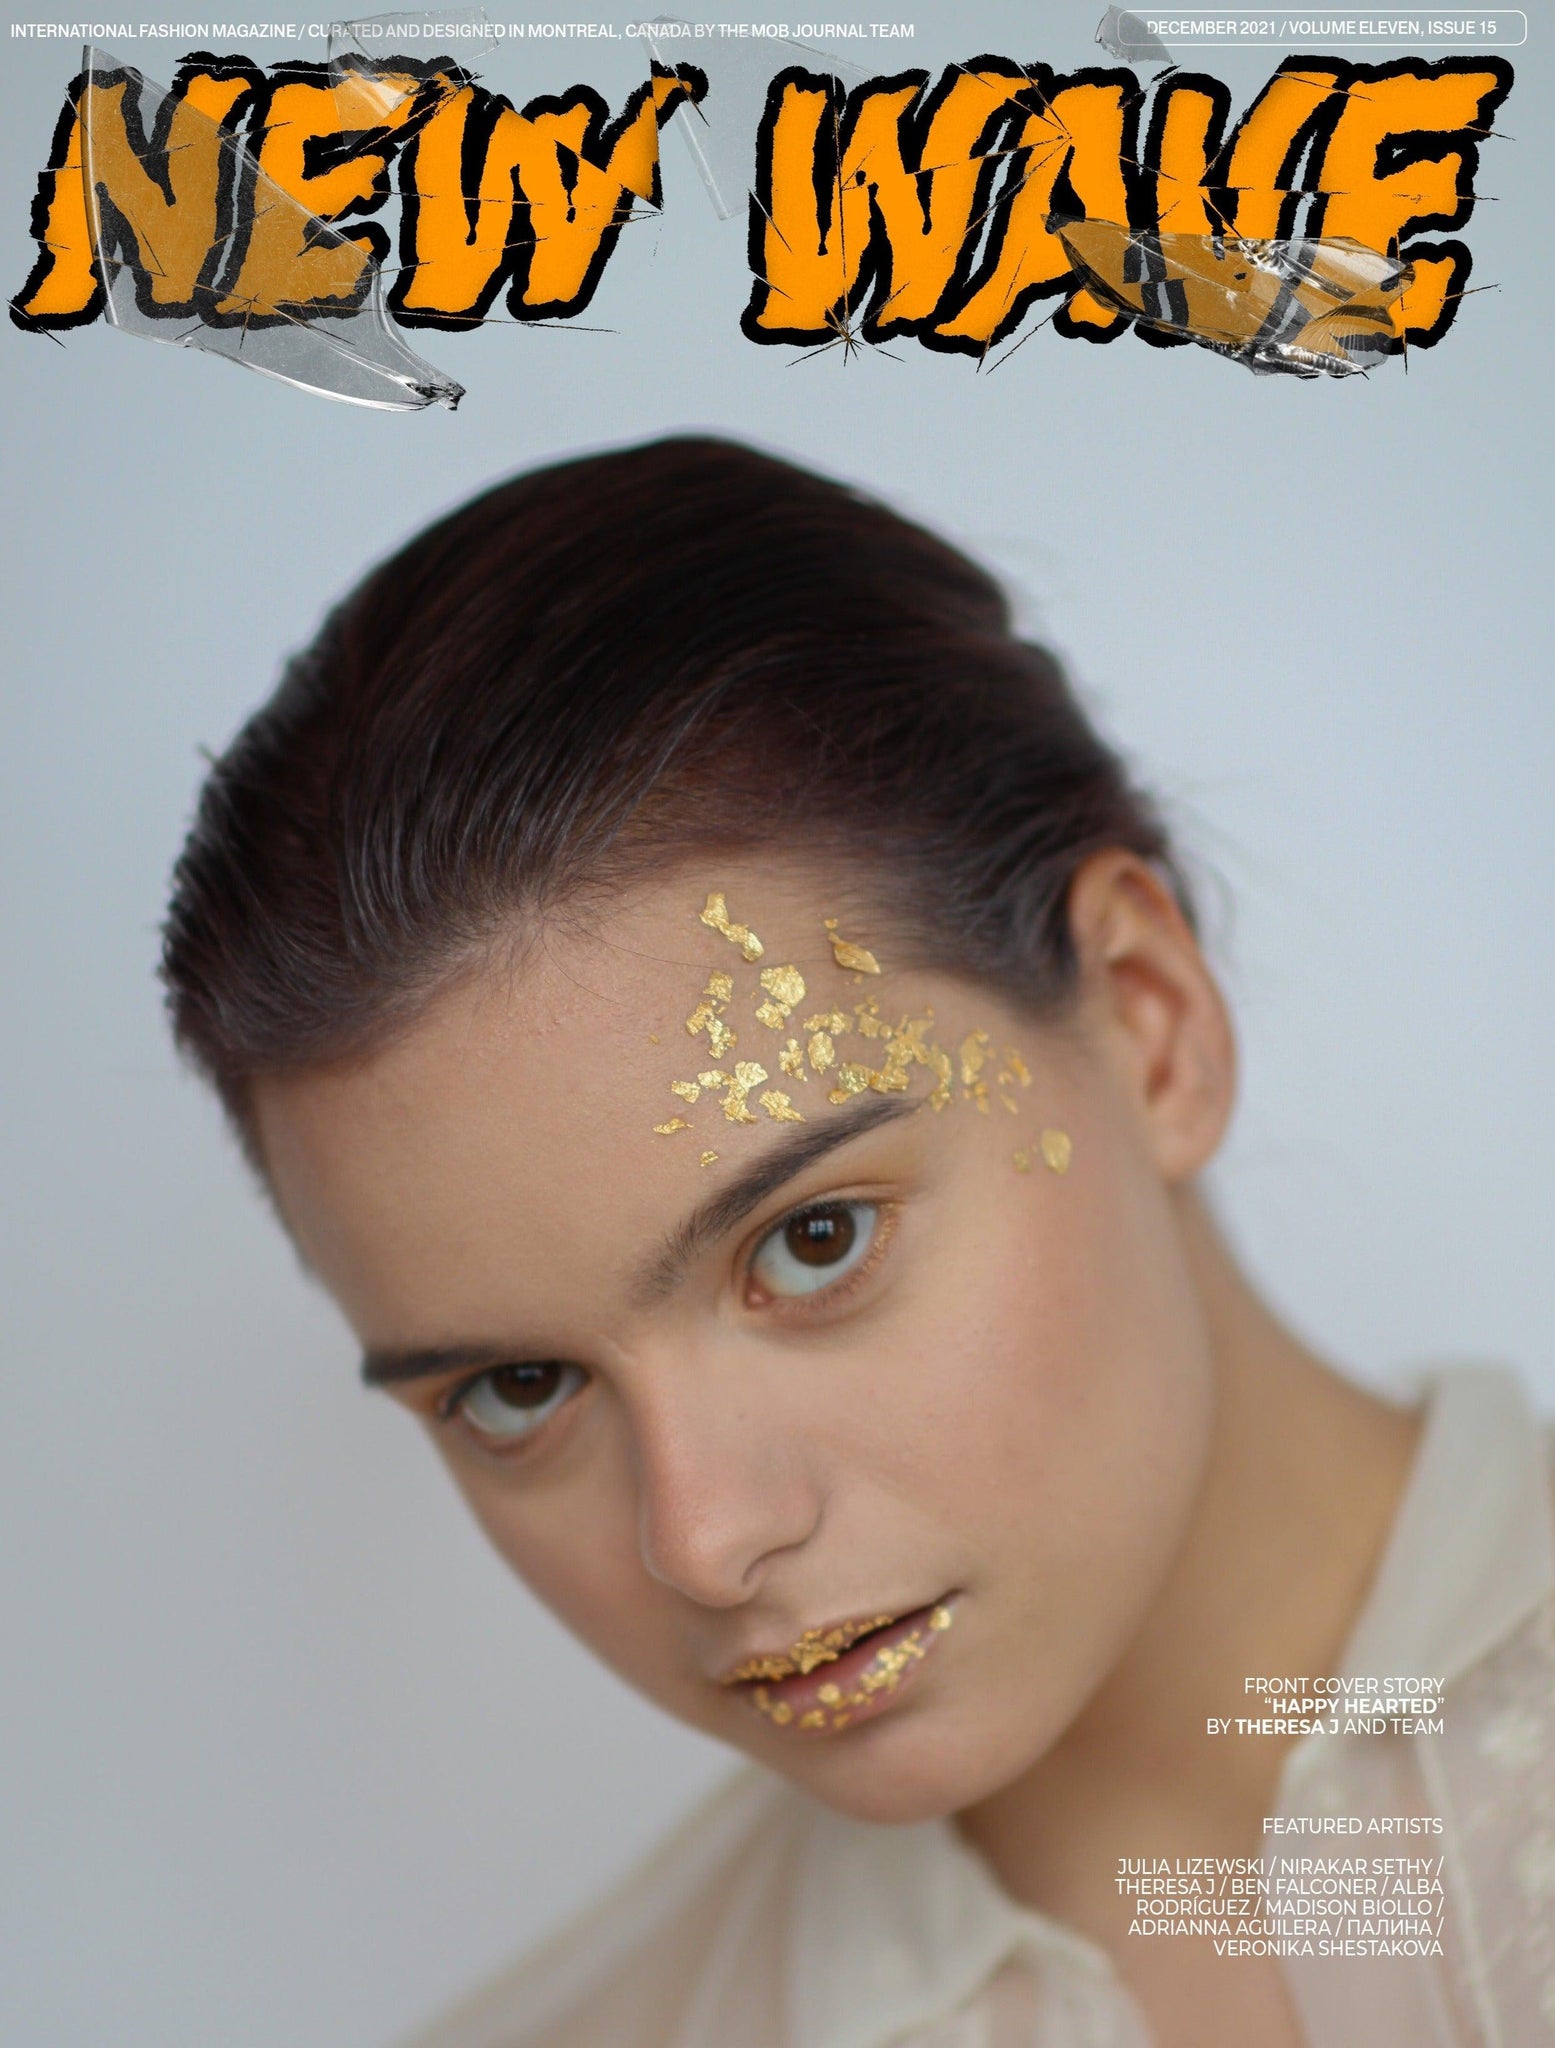 NEW WAVE | VOLUME ELEVEN | ISSUE #15 - Mob Journal